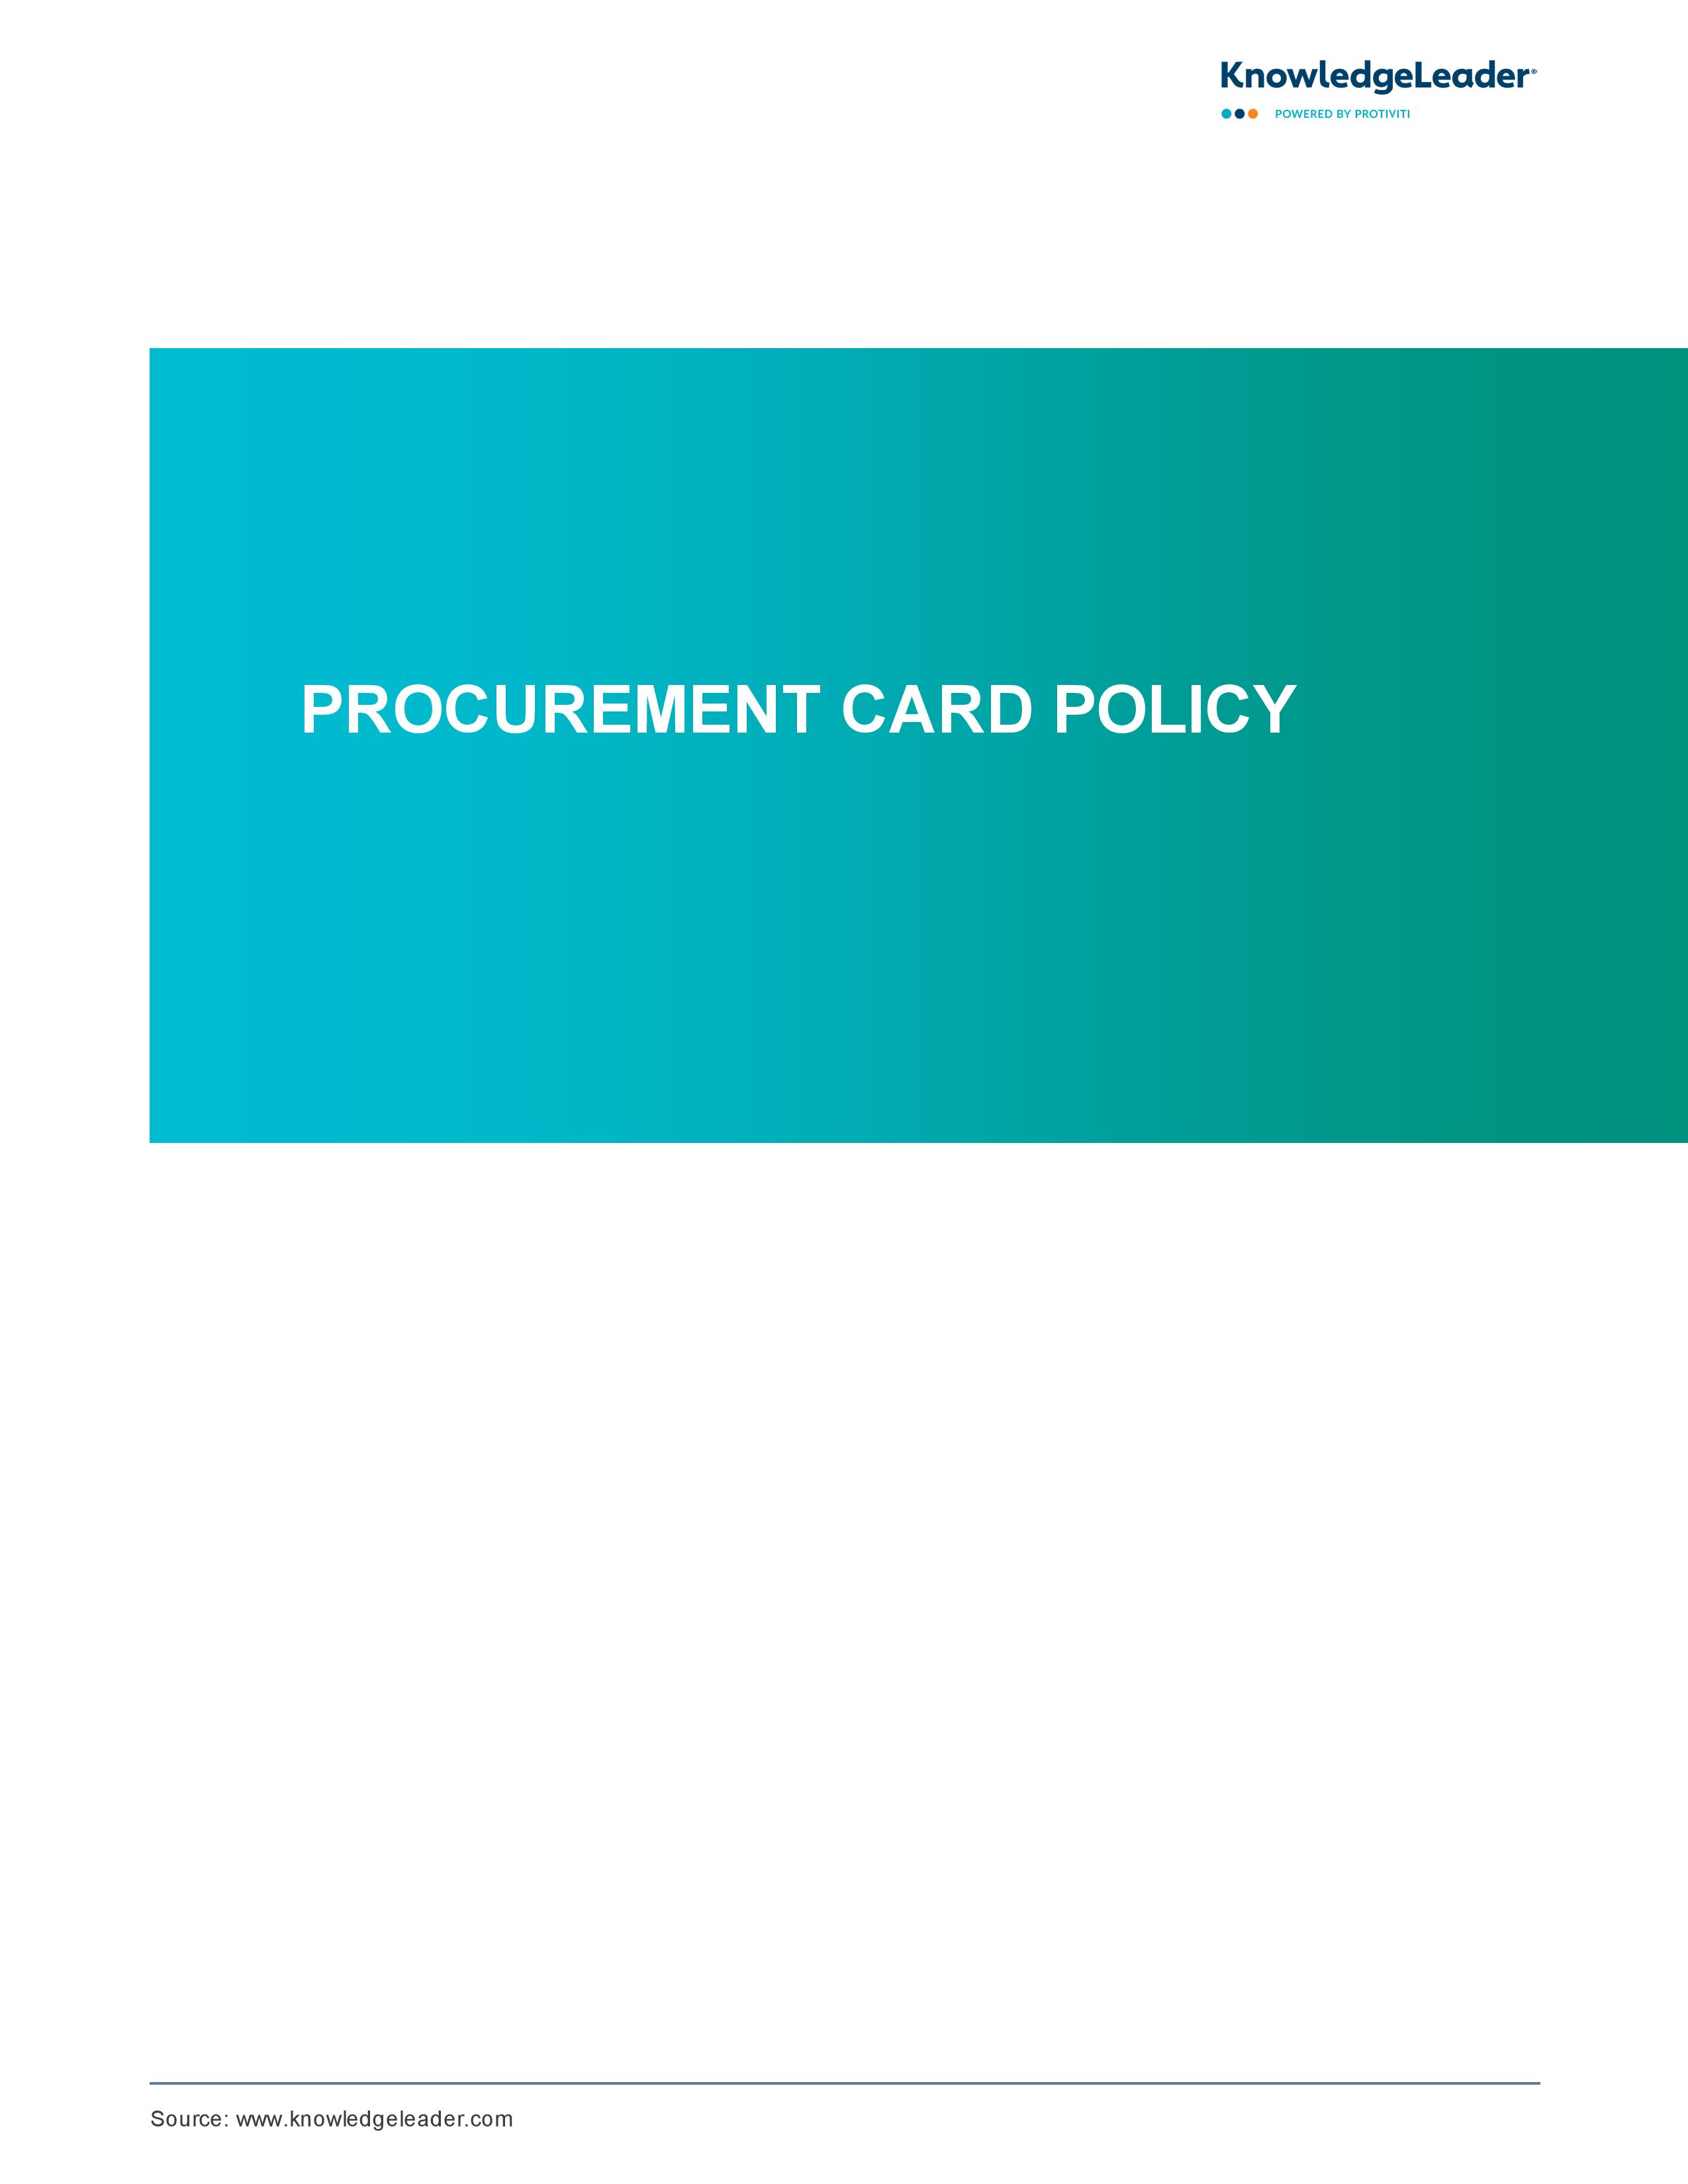 screenshot of the first page of Procurement Card Policy